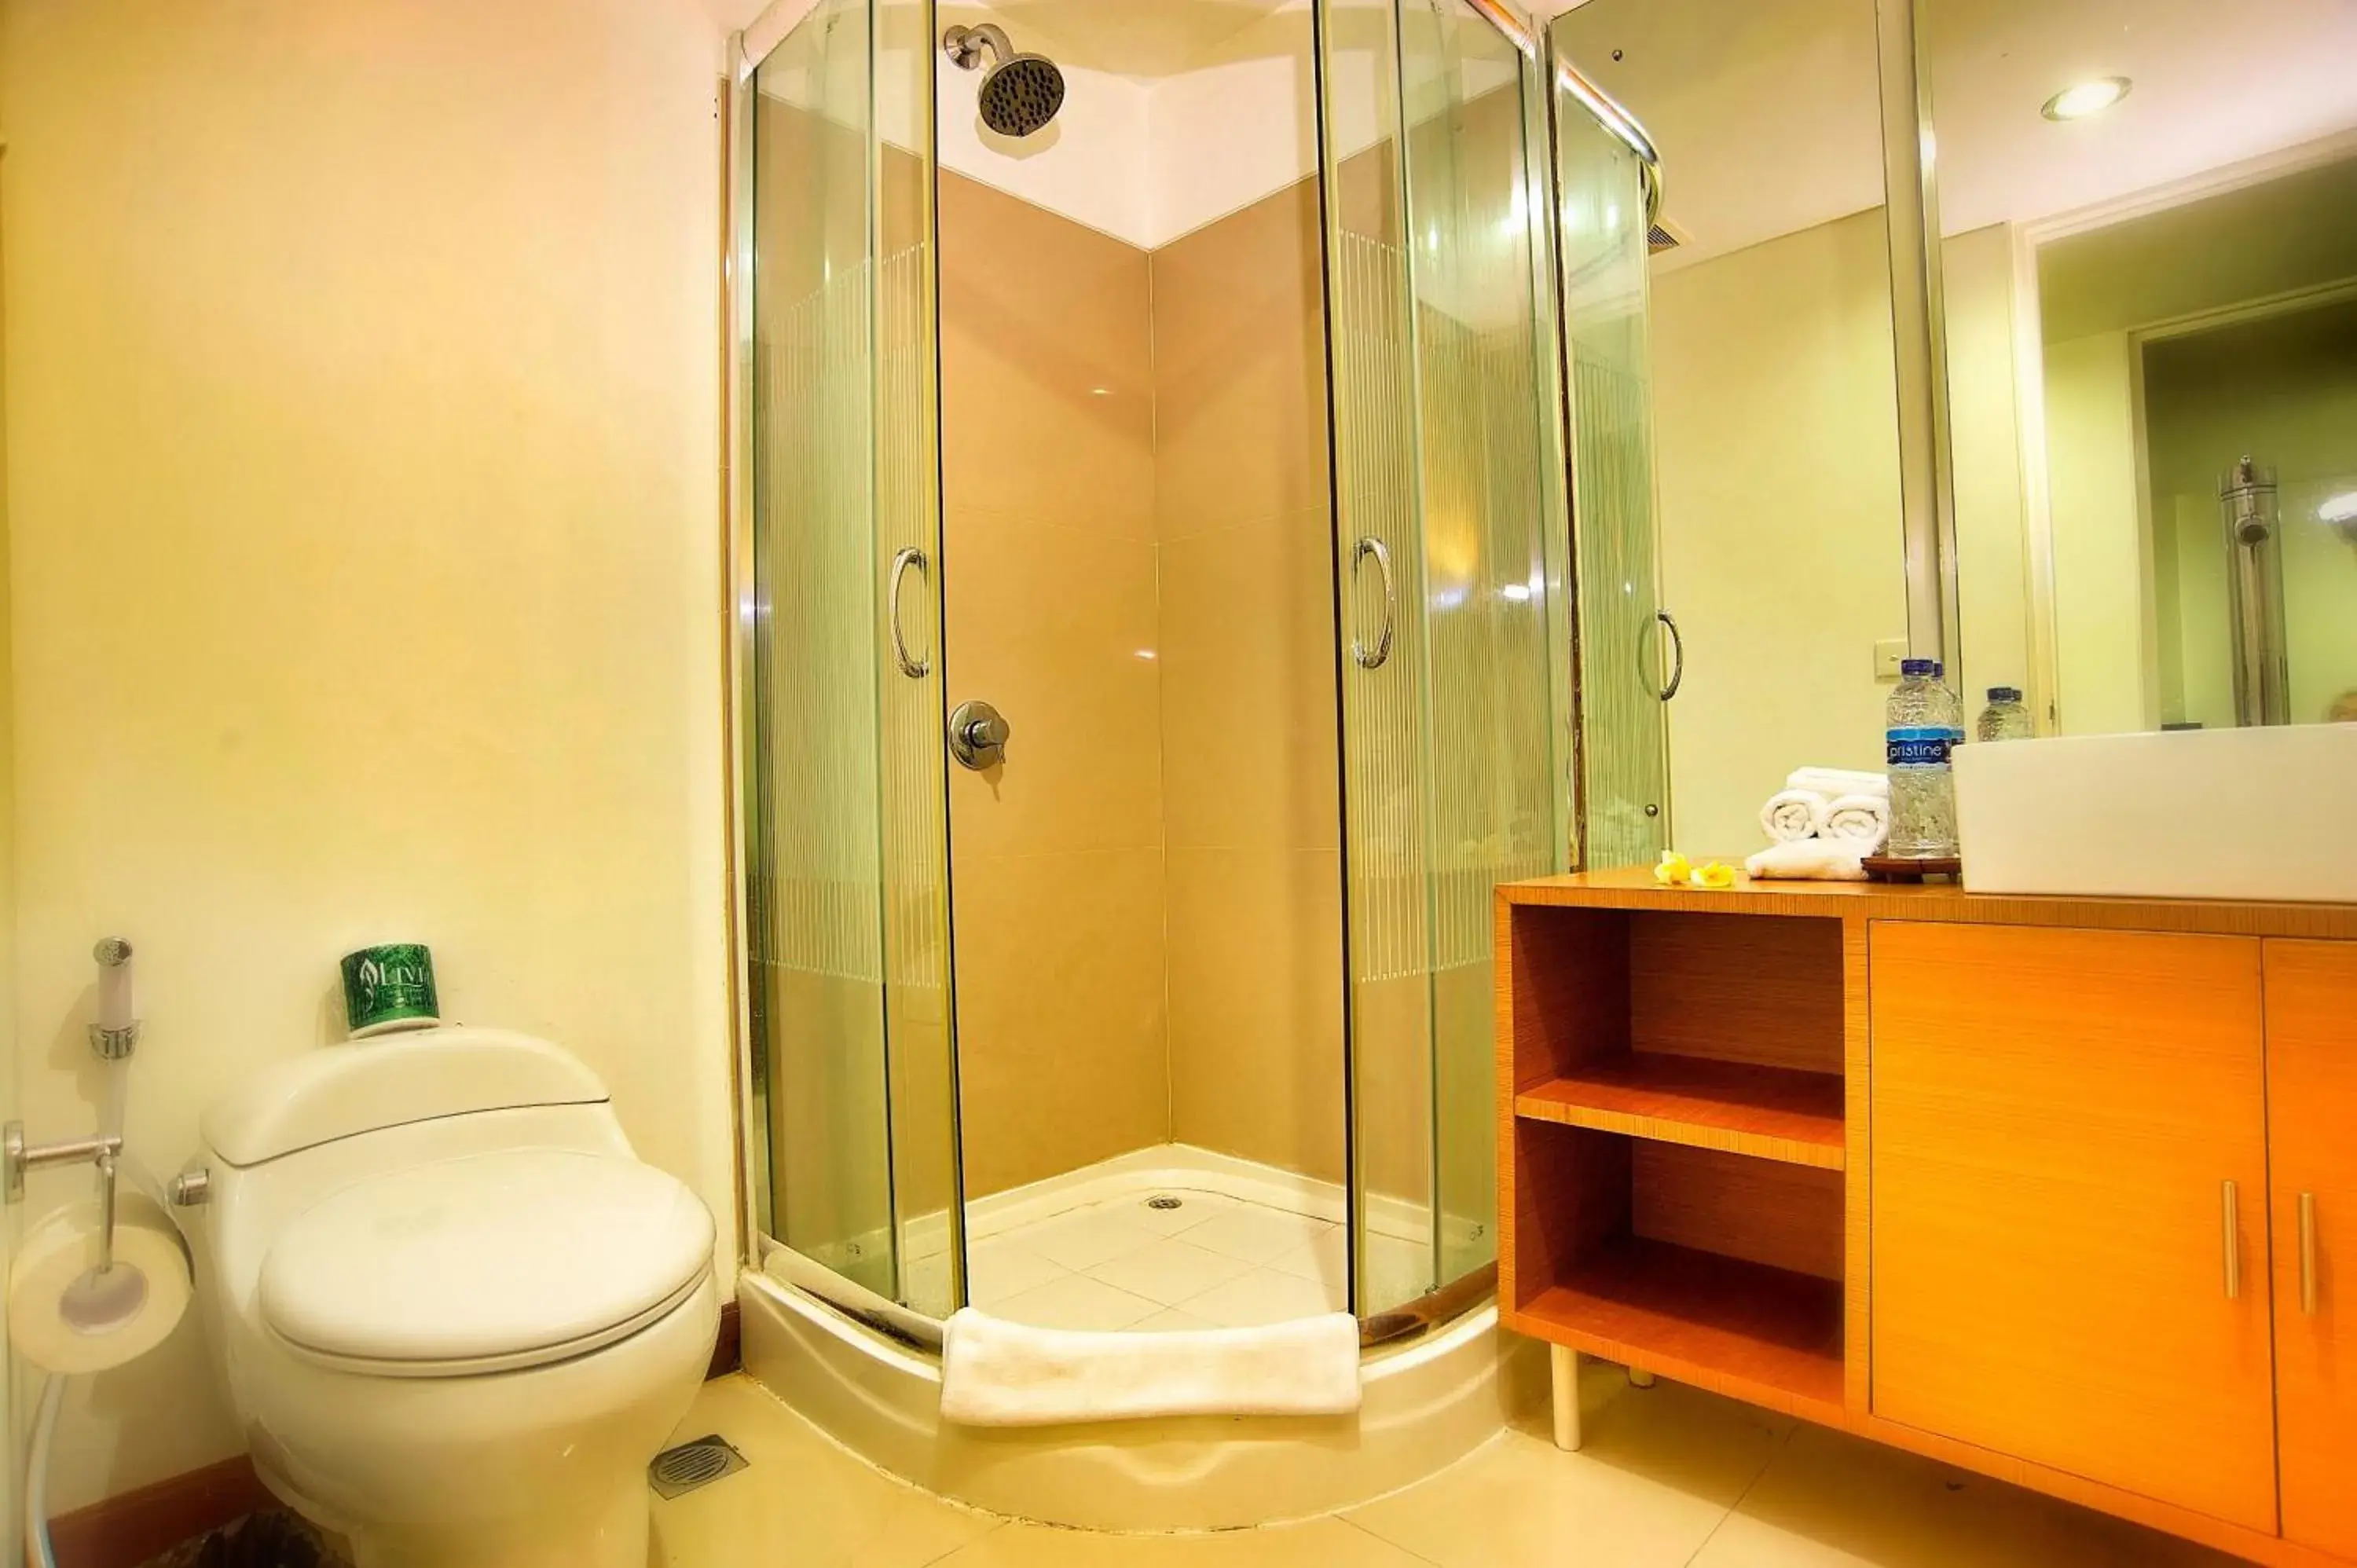 Bathroom in Sunset Residence and Condotel